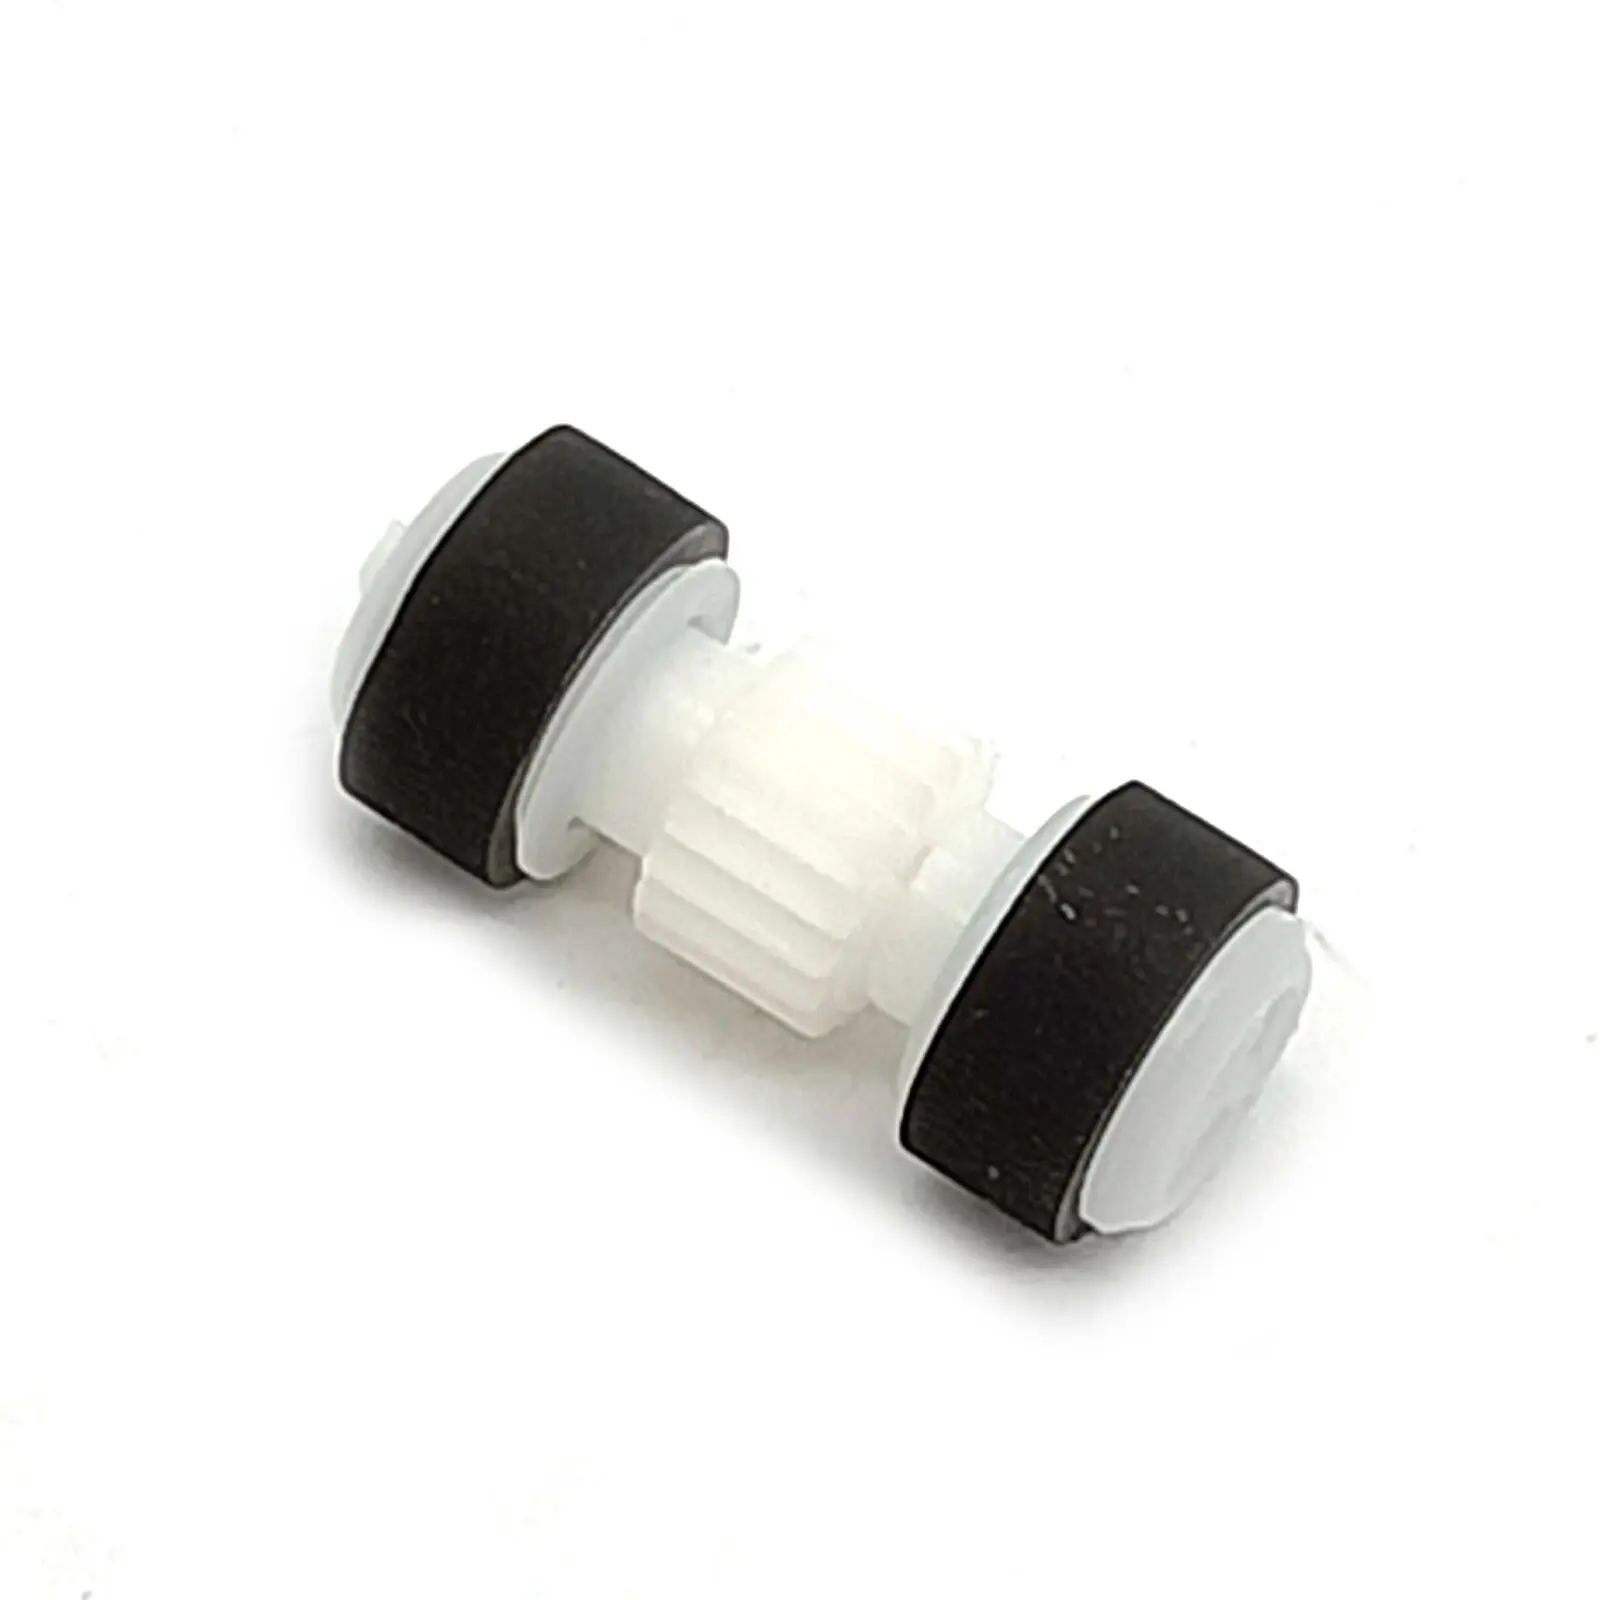 

Pickup Roller Fits For Canon IB4150 IB4060 MB2110 MG5630 MB2320 MG5640 MB2090 IB4080 MB2150 MB2060 IB4020 MB2020 IB4180 MB2140